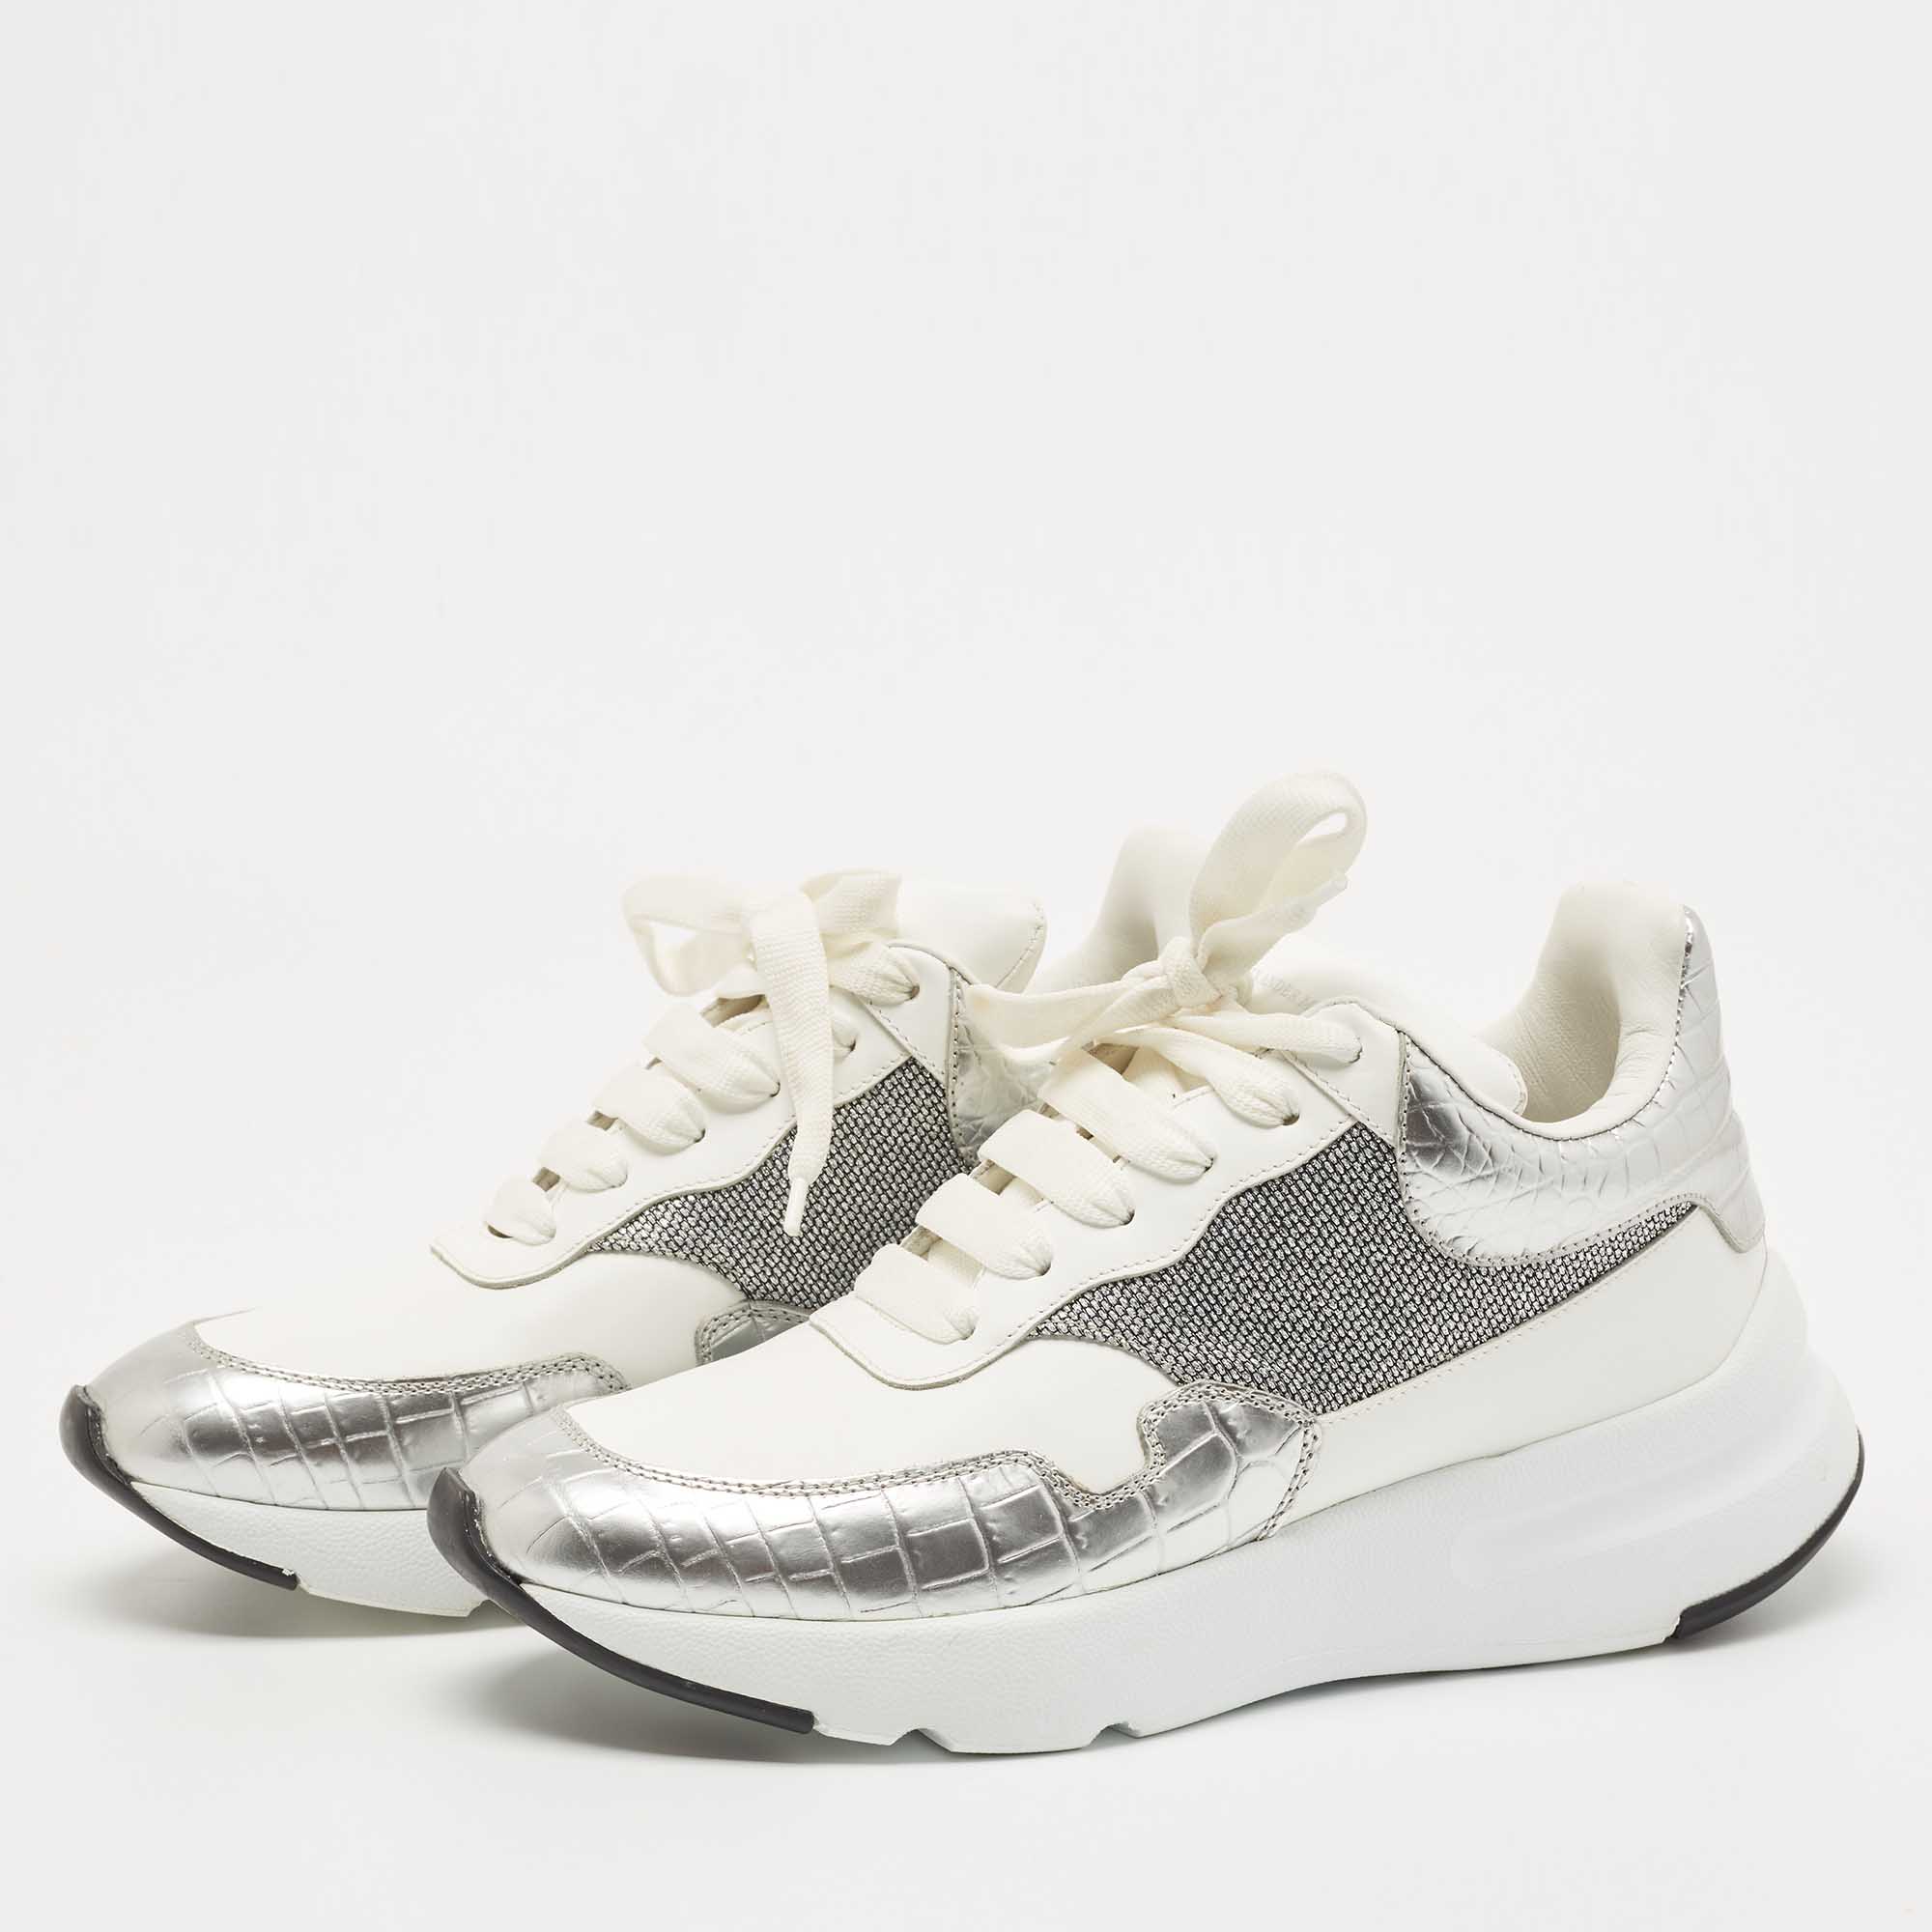 

Alexander McQueen White Croc Embossed Leather Oversized Low Top Sneakers Size